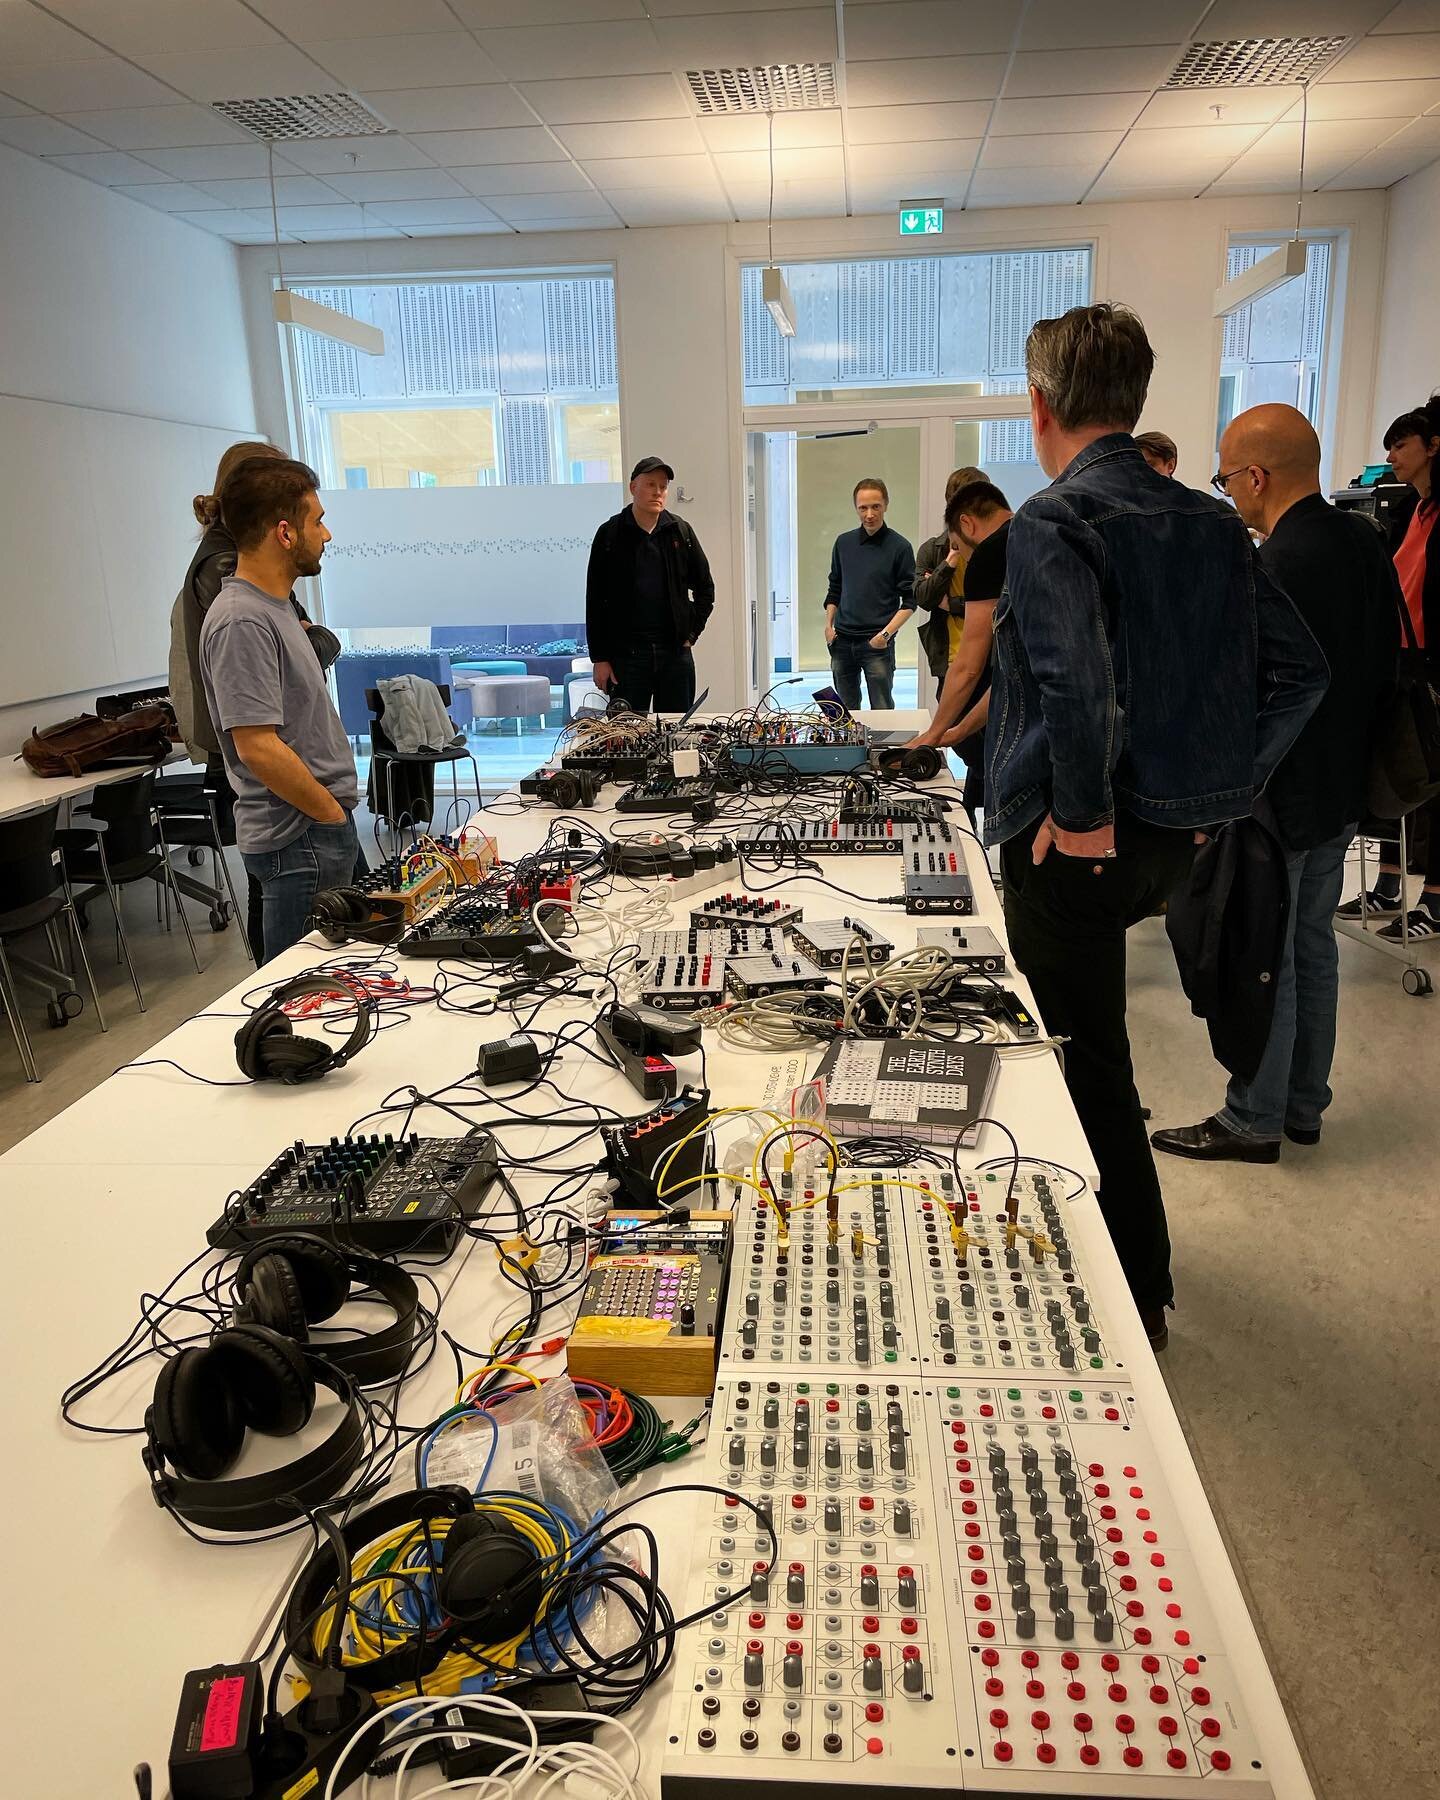 Throwback to a couple of weeks ago, at a small modular meetup at KMH put together by @codespira1 , good times, I did a show and tell about the amazing #7375serge panels built by @thc.synth , save the date 11 nov 2022, then another #modularsynth event